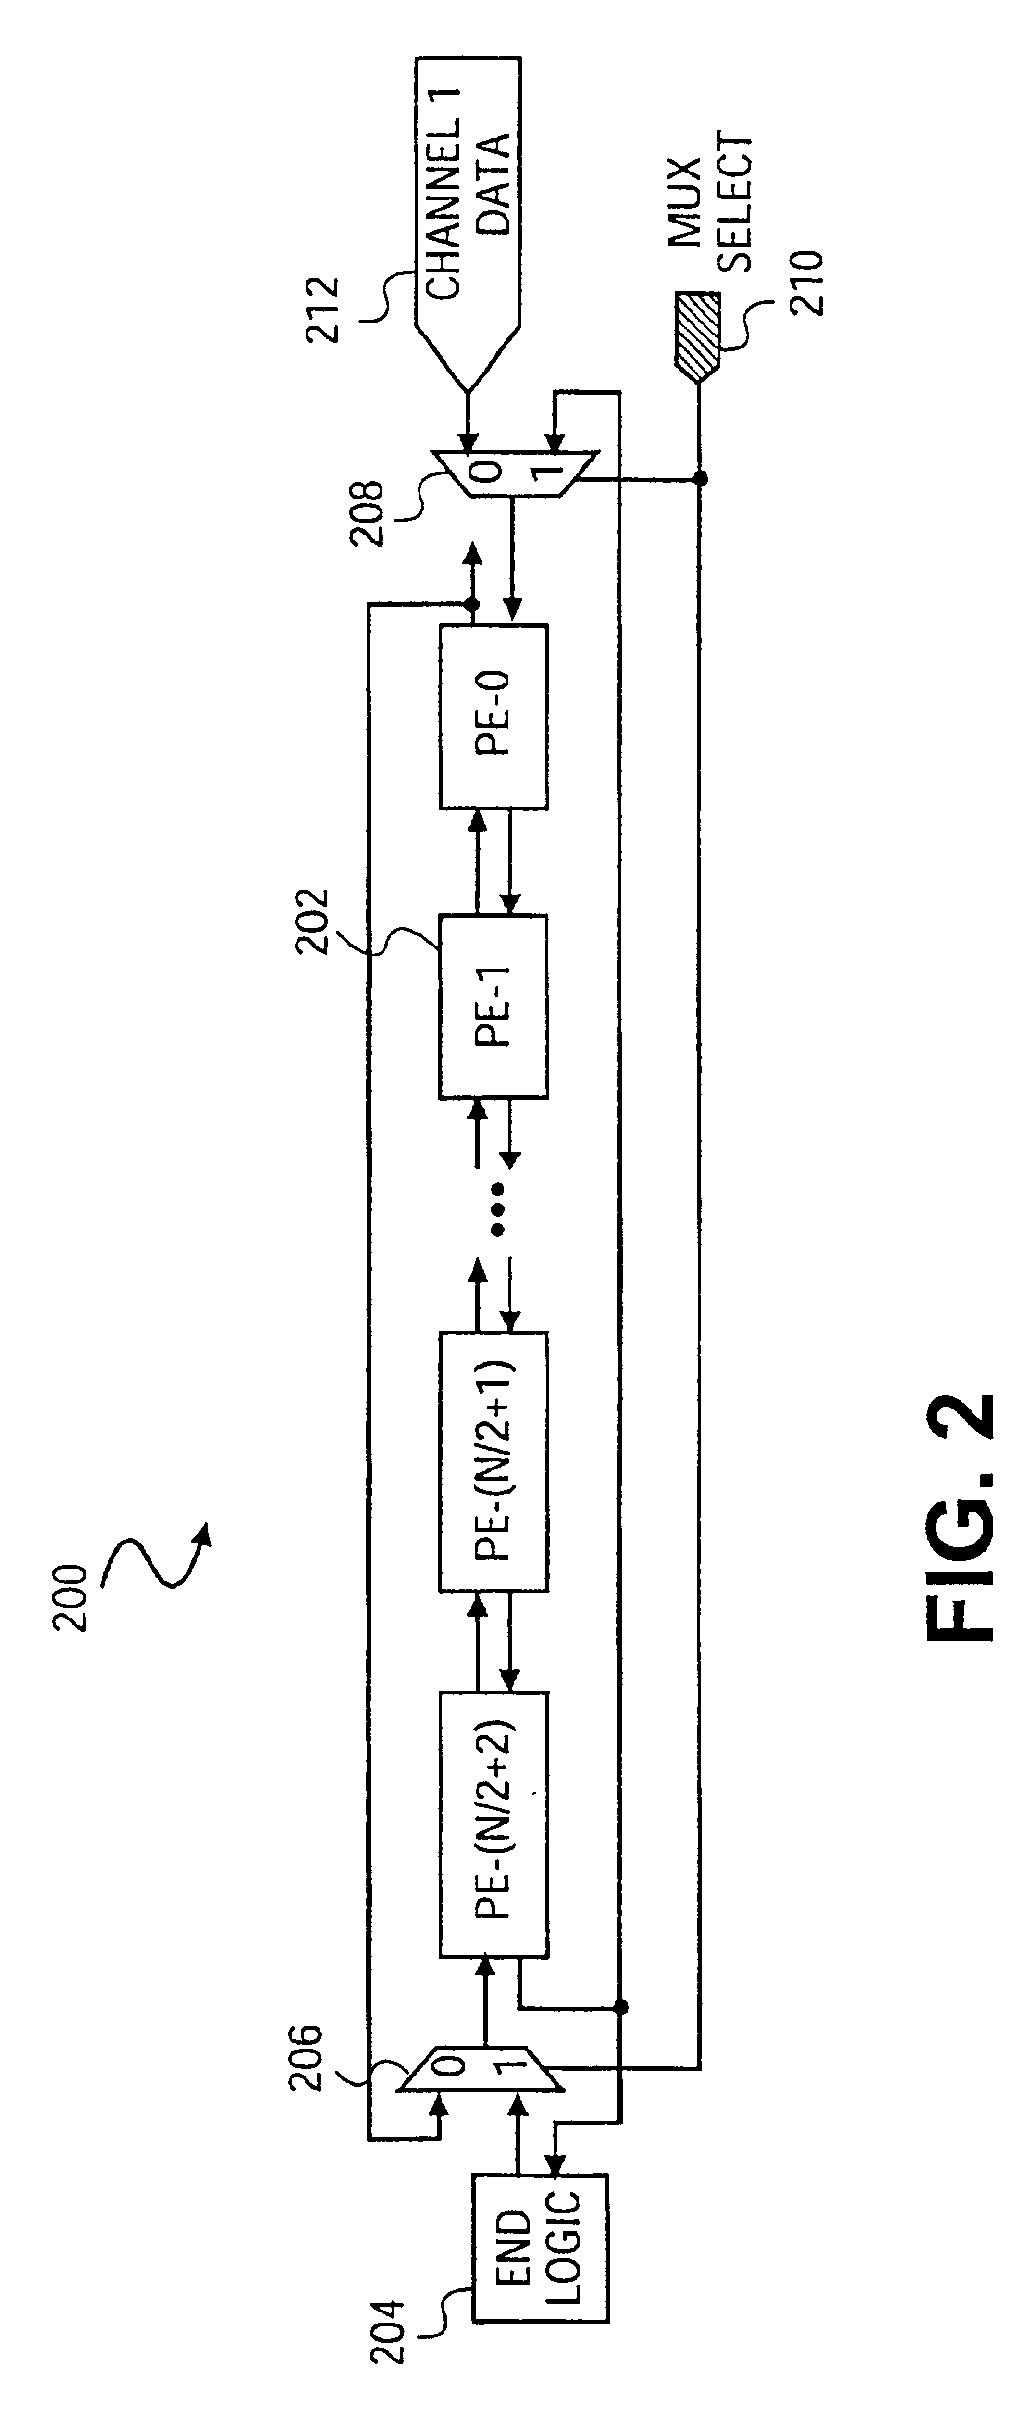 Method and apparatus for performing modular multiplication